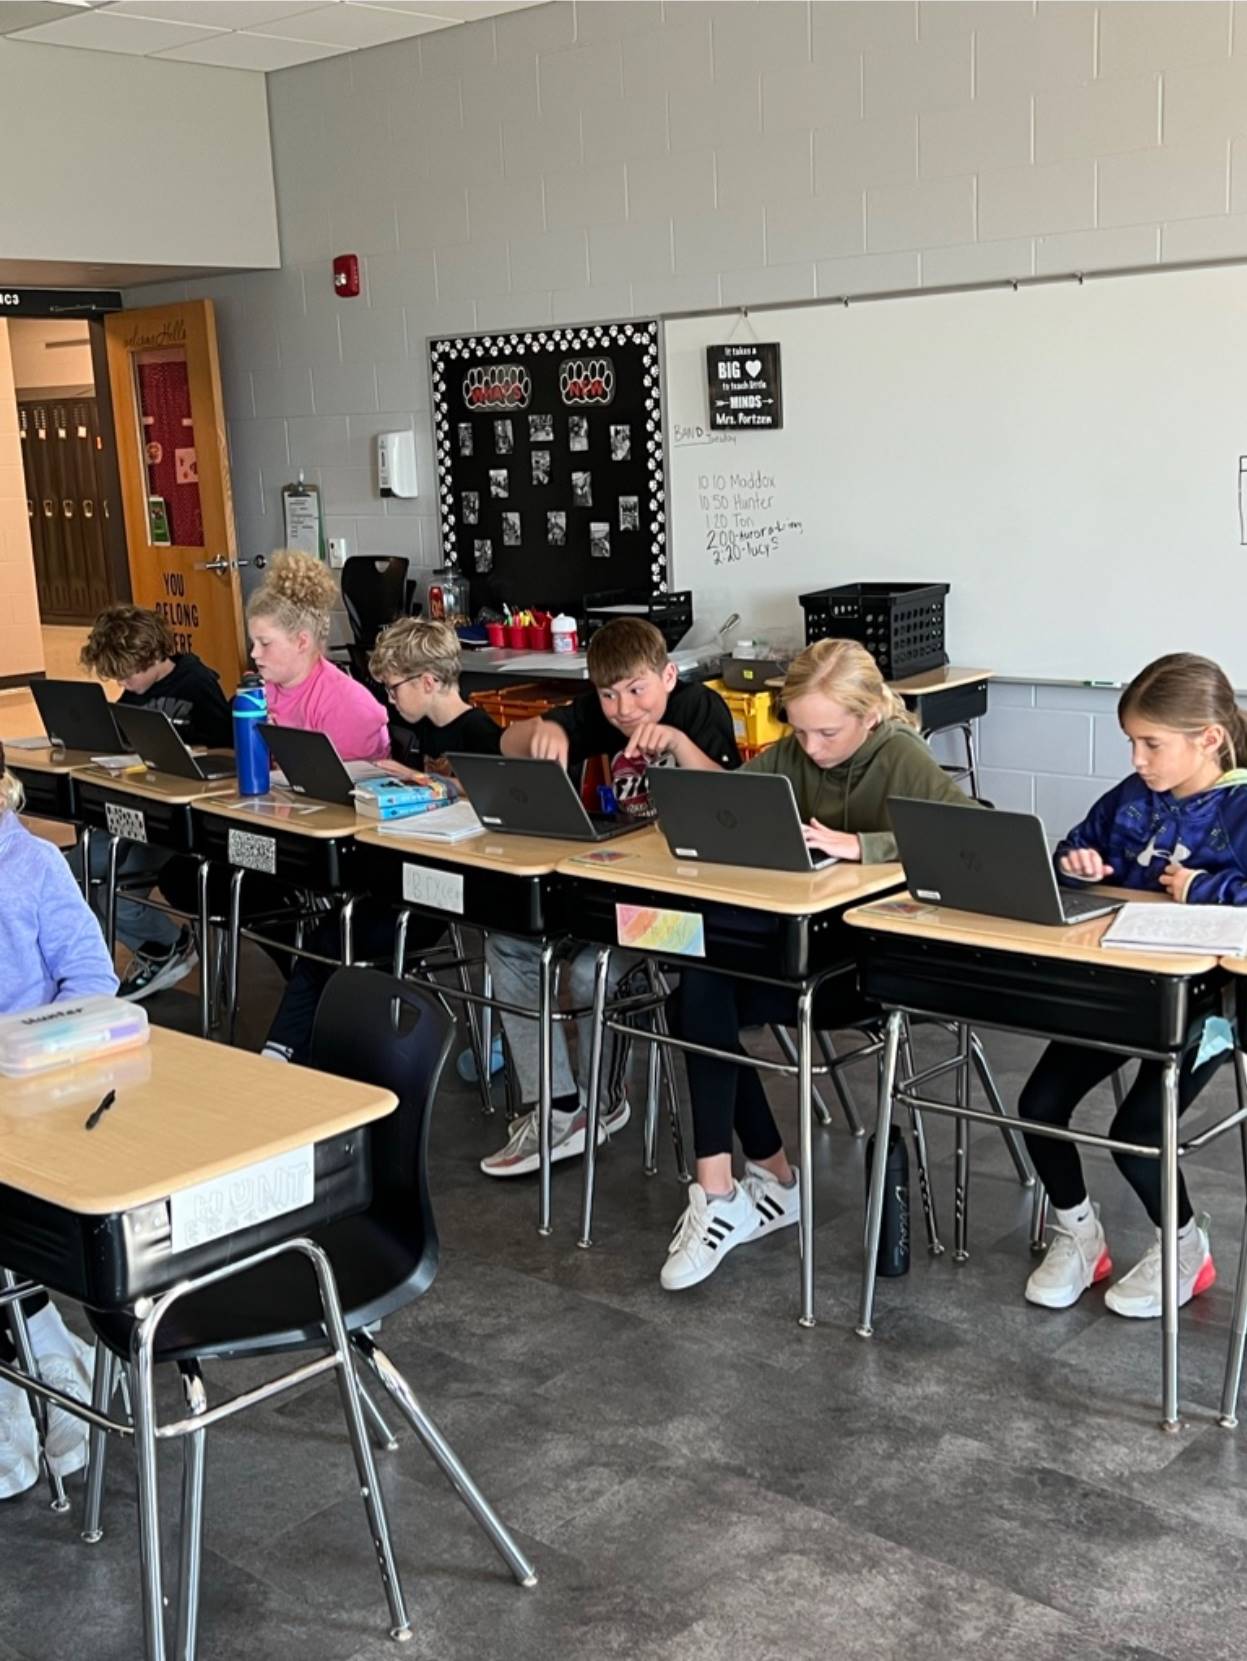 5th grade students working on laptops